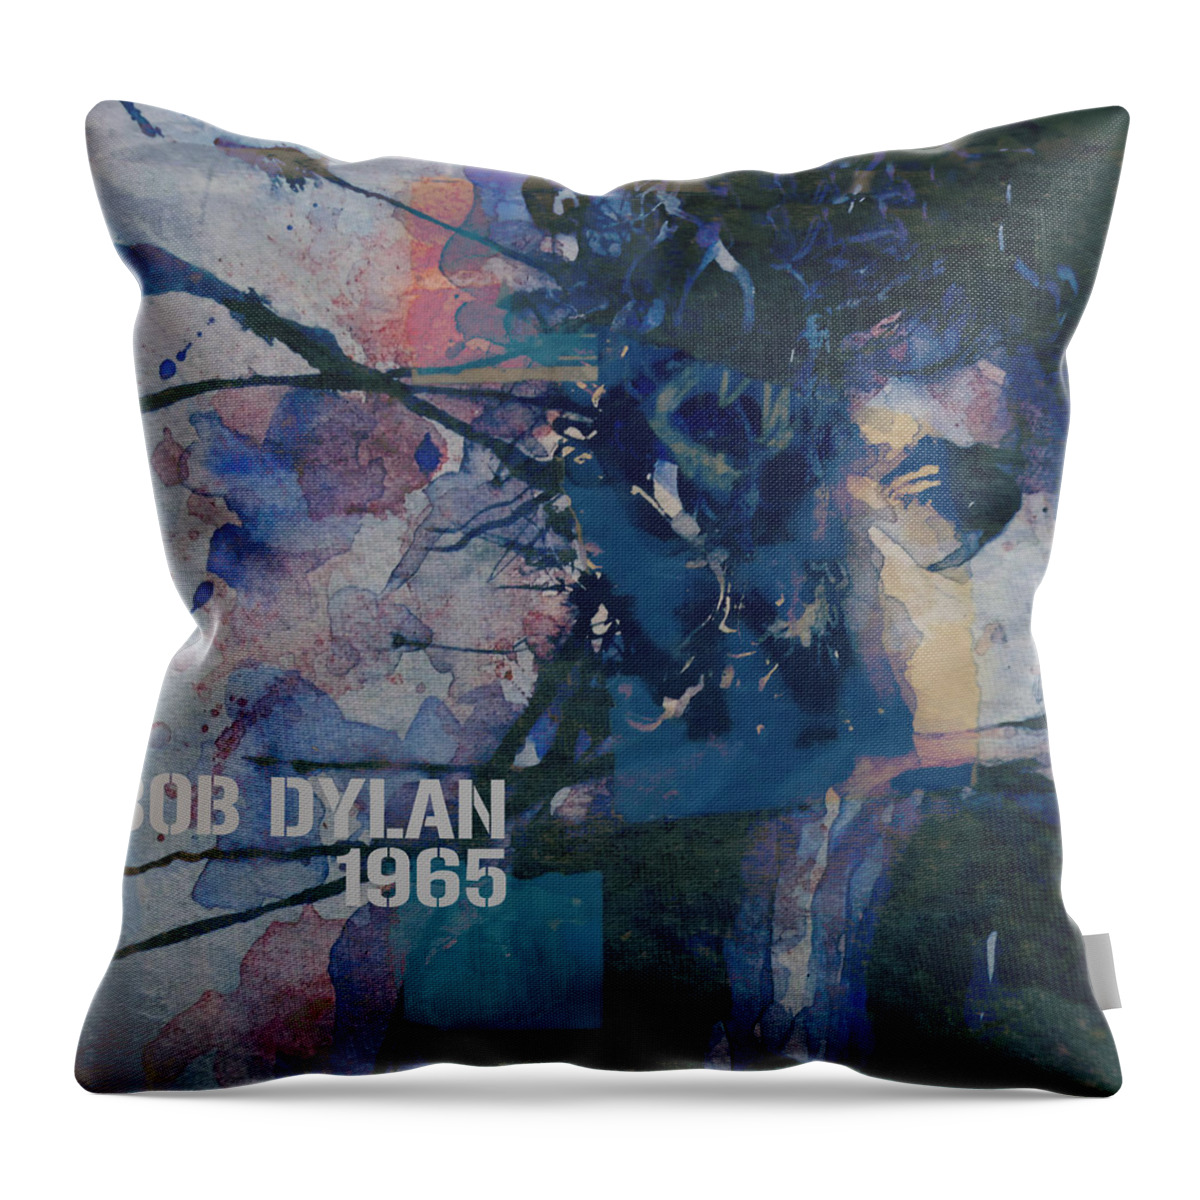 Bob Dylan Throw Pillow featuring the painting Positively 4th Street by Paul Lovering